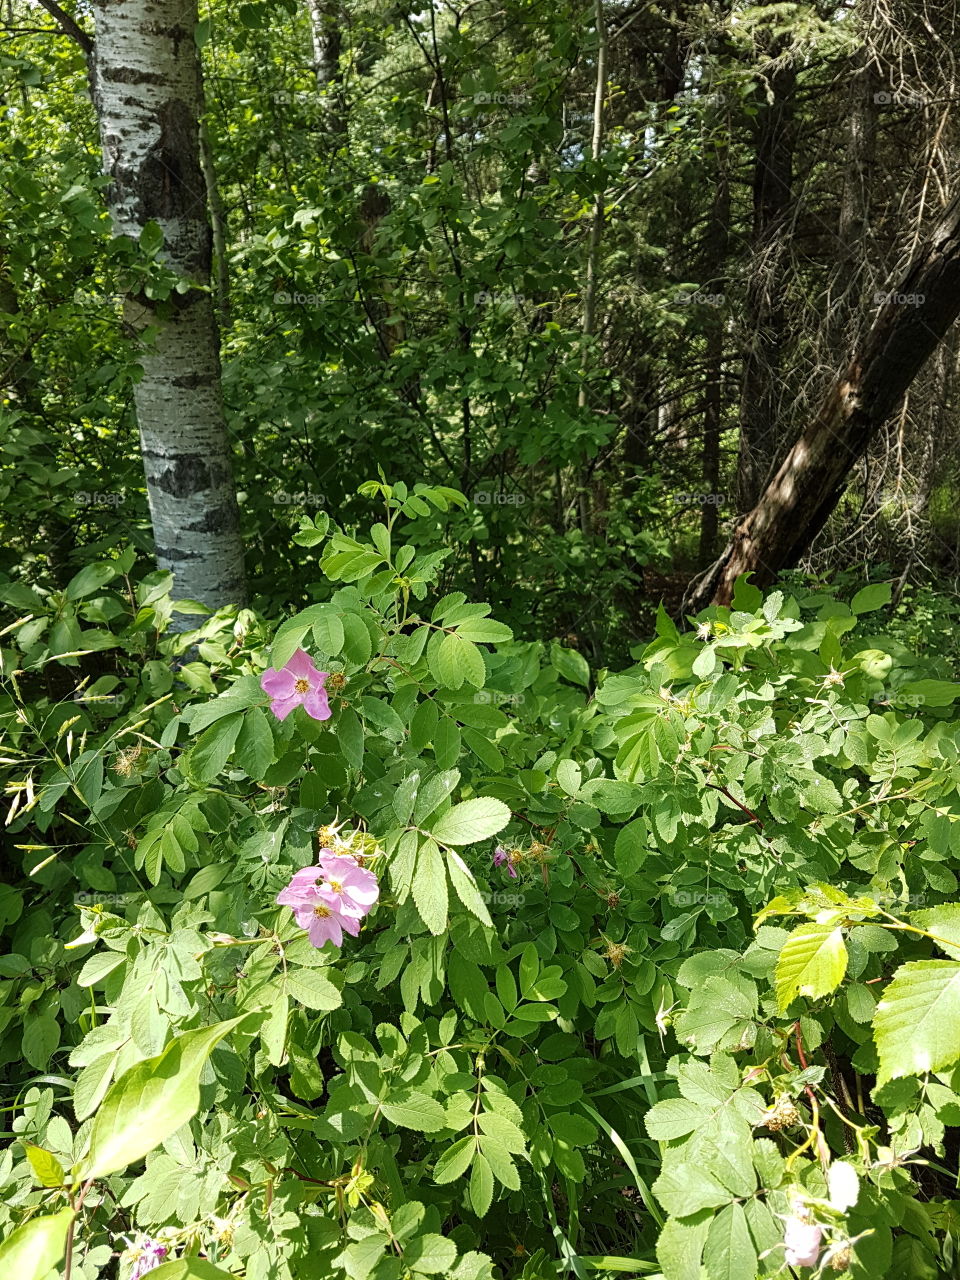 Wild roses blooming in park forest